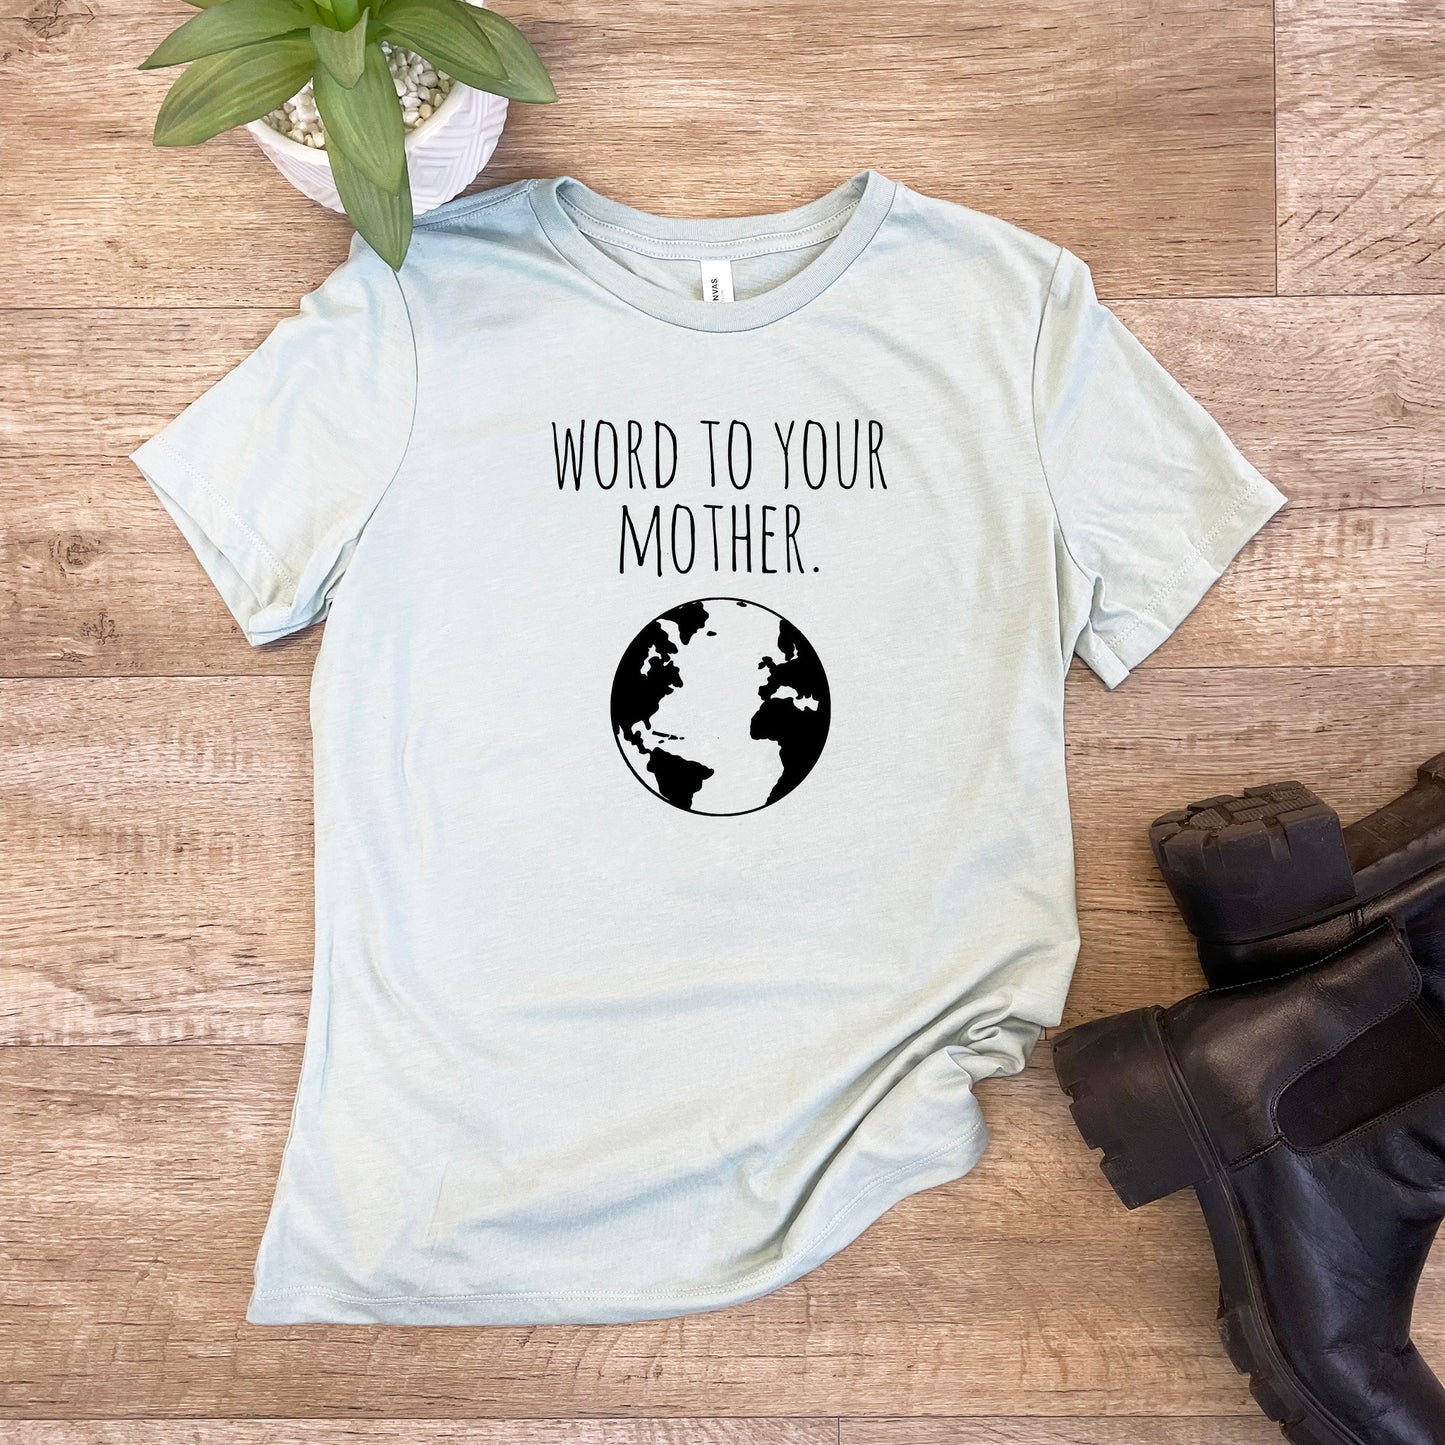 Word to Your Mother (Earth) - Women's Crew Tee - Olive or Dusty Blue